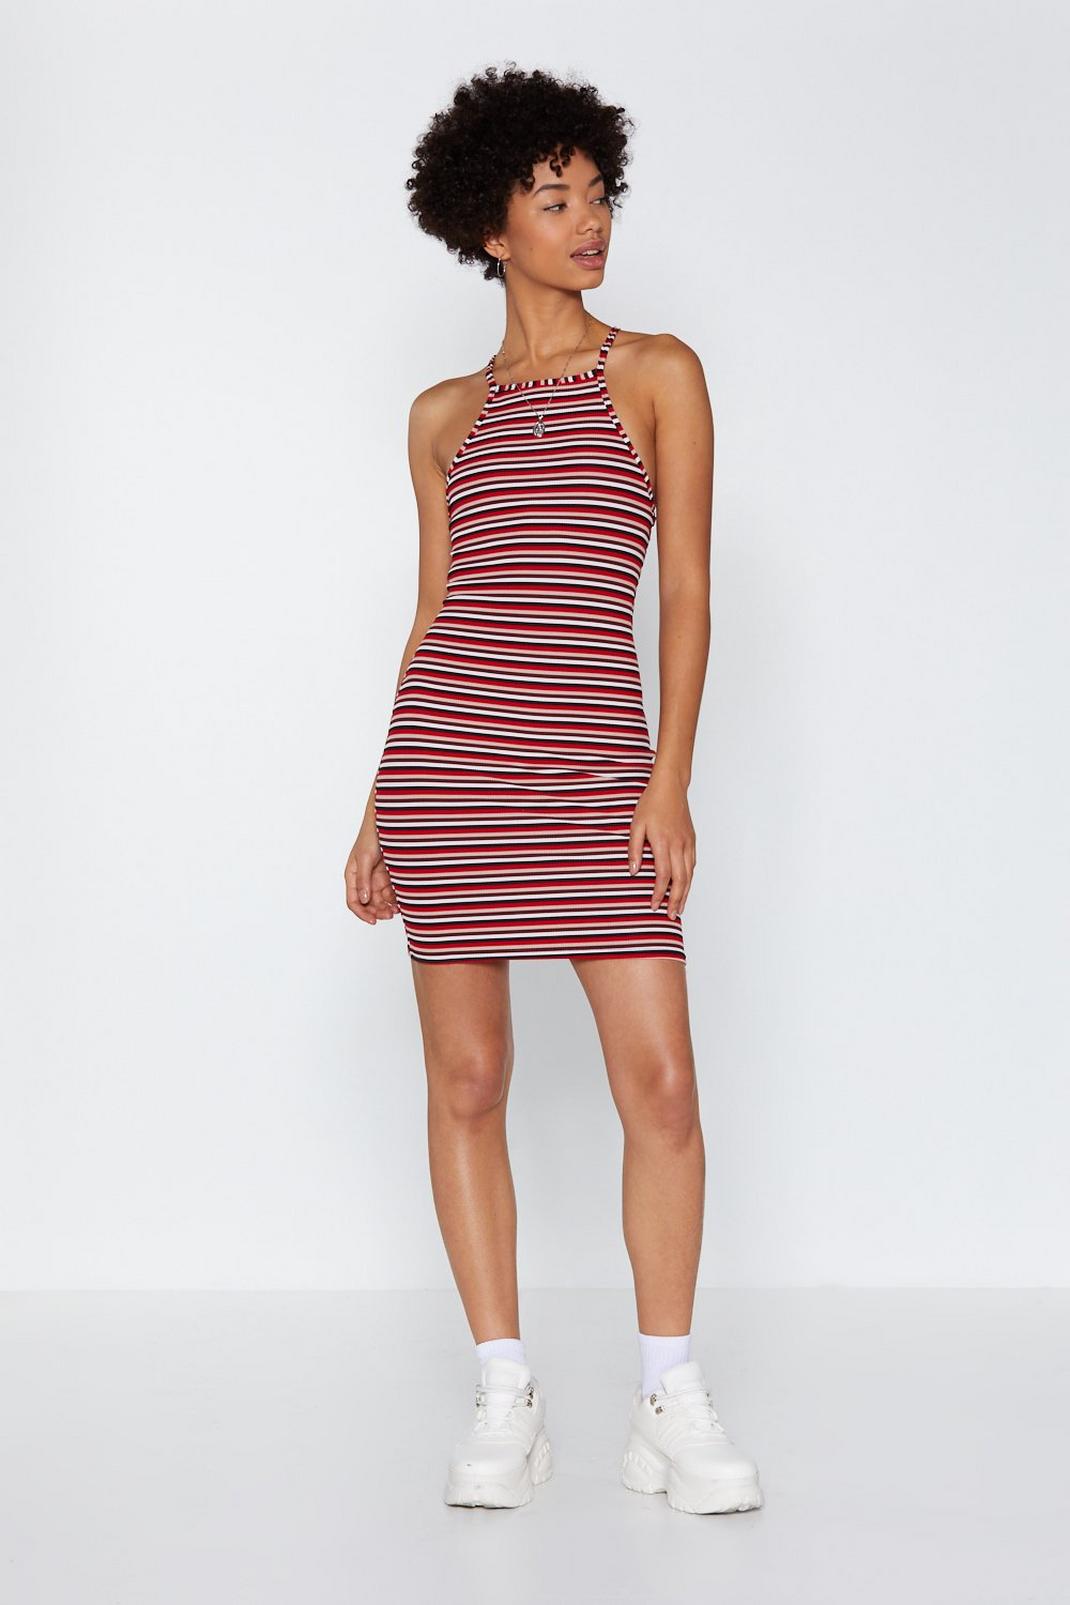 Set Yourself Straight Striped Dress image number 1